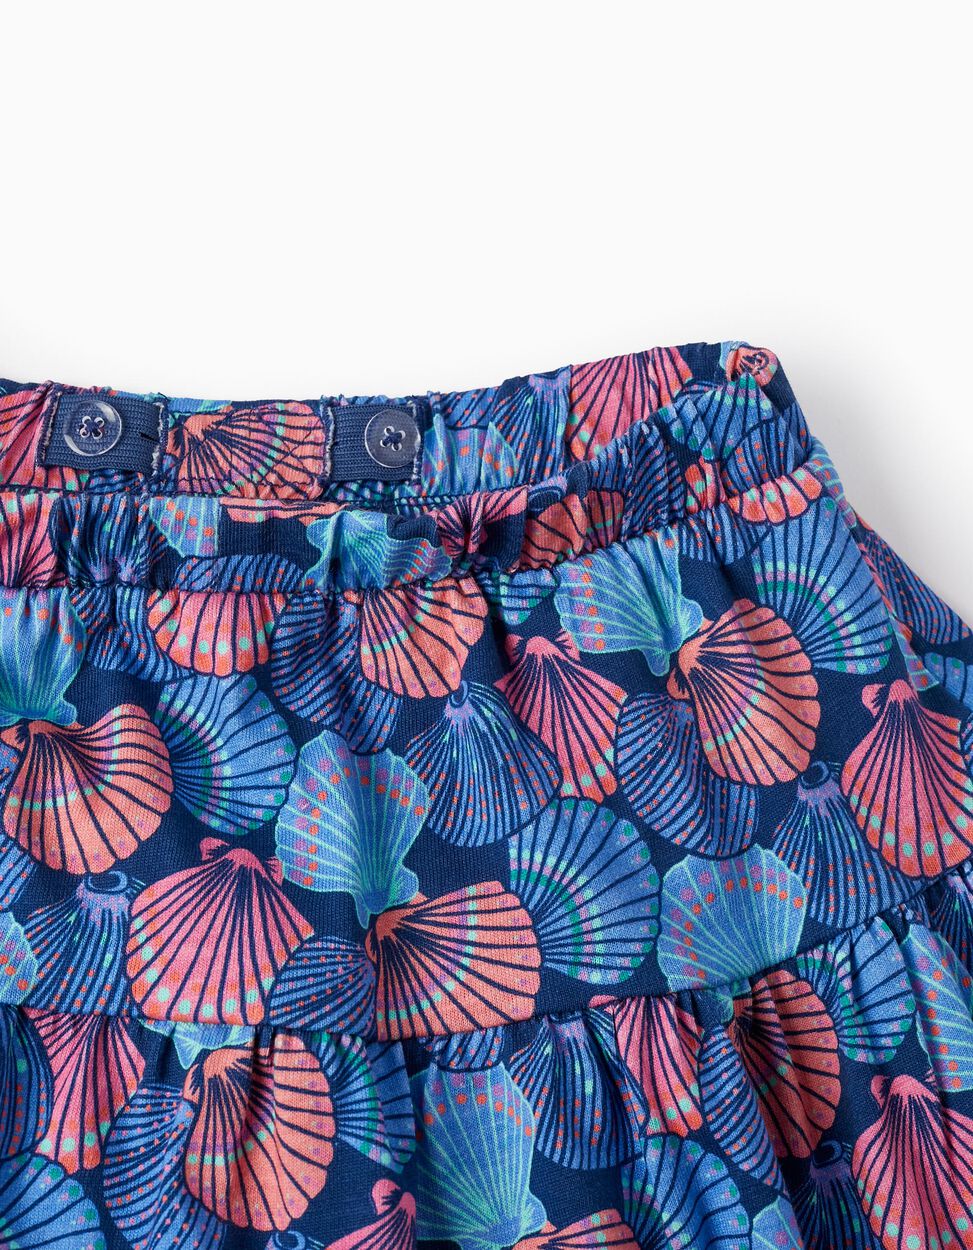 Buy Online Printed Skirt with Built-in Shorts for Girls, Blue/Coral